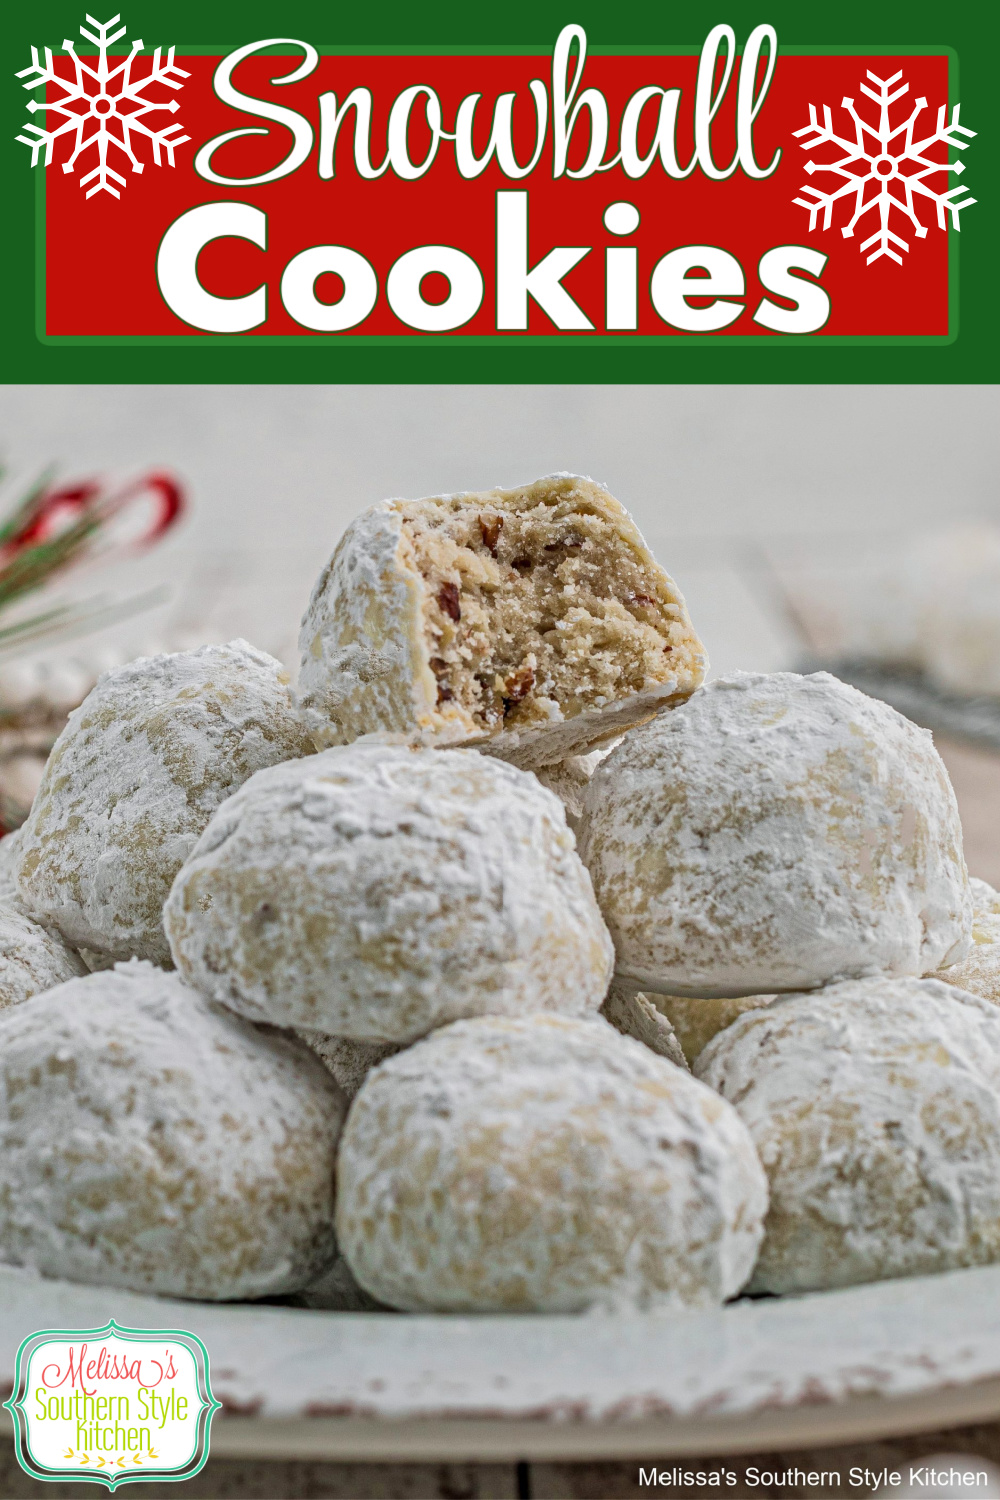 These holiday Snowball Cookies are rolled in a copious amount of powdered sugar, transforming them into a buttery bite of sugar cookie heaven #snowballs #snowballcookies #russianteacakes #mexicanweddingcookies #pecancookies #pecans #christmascookies #cookierecipes #bestsnowballcookies